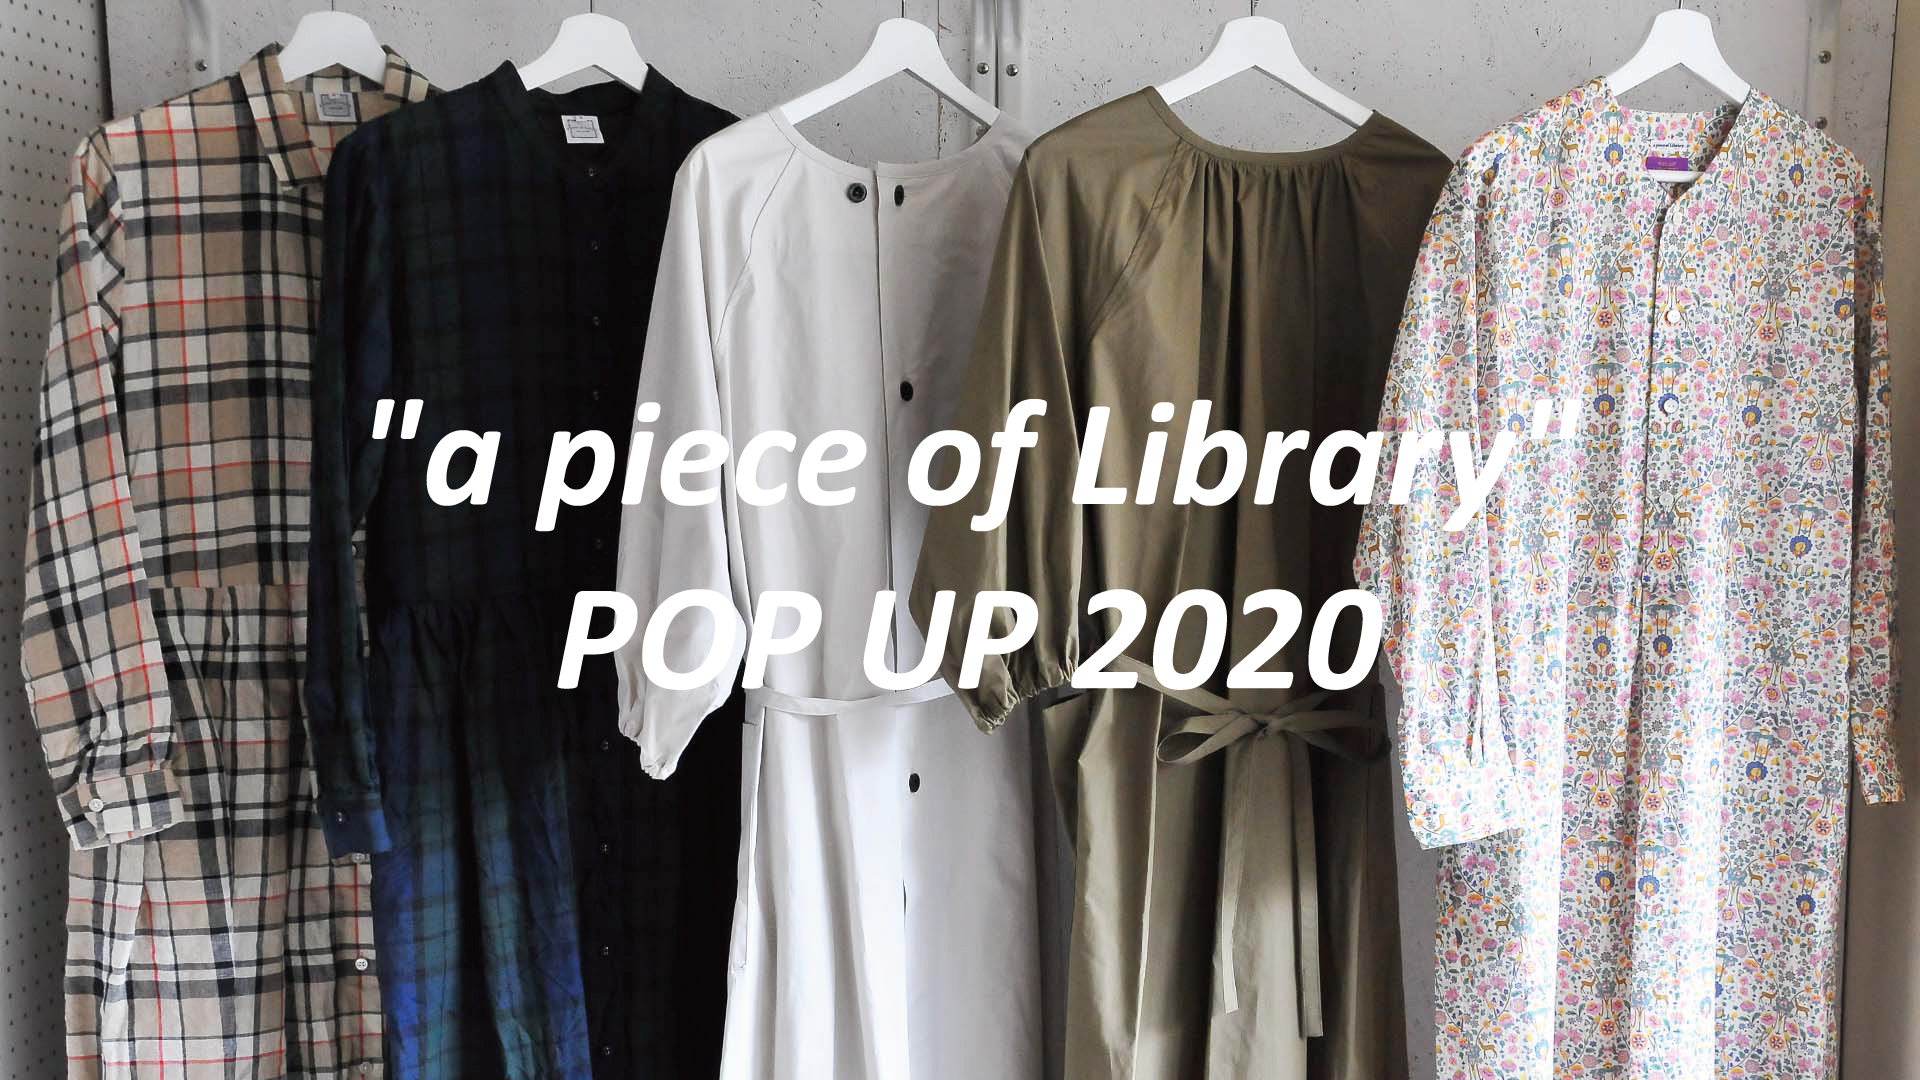 "a piece of Library" POP UP 2020